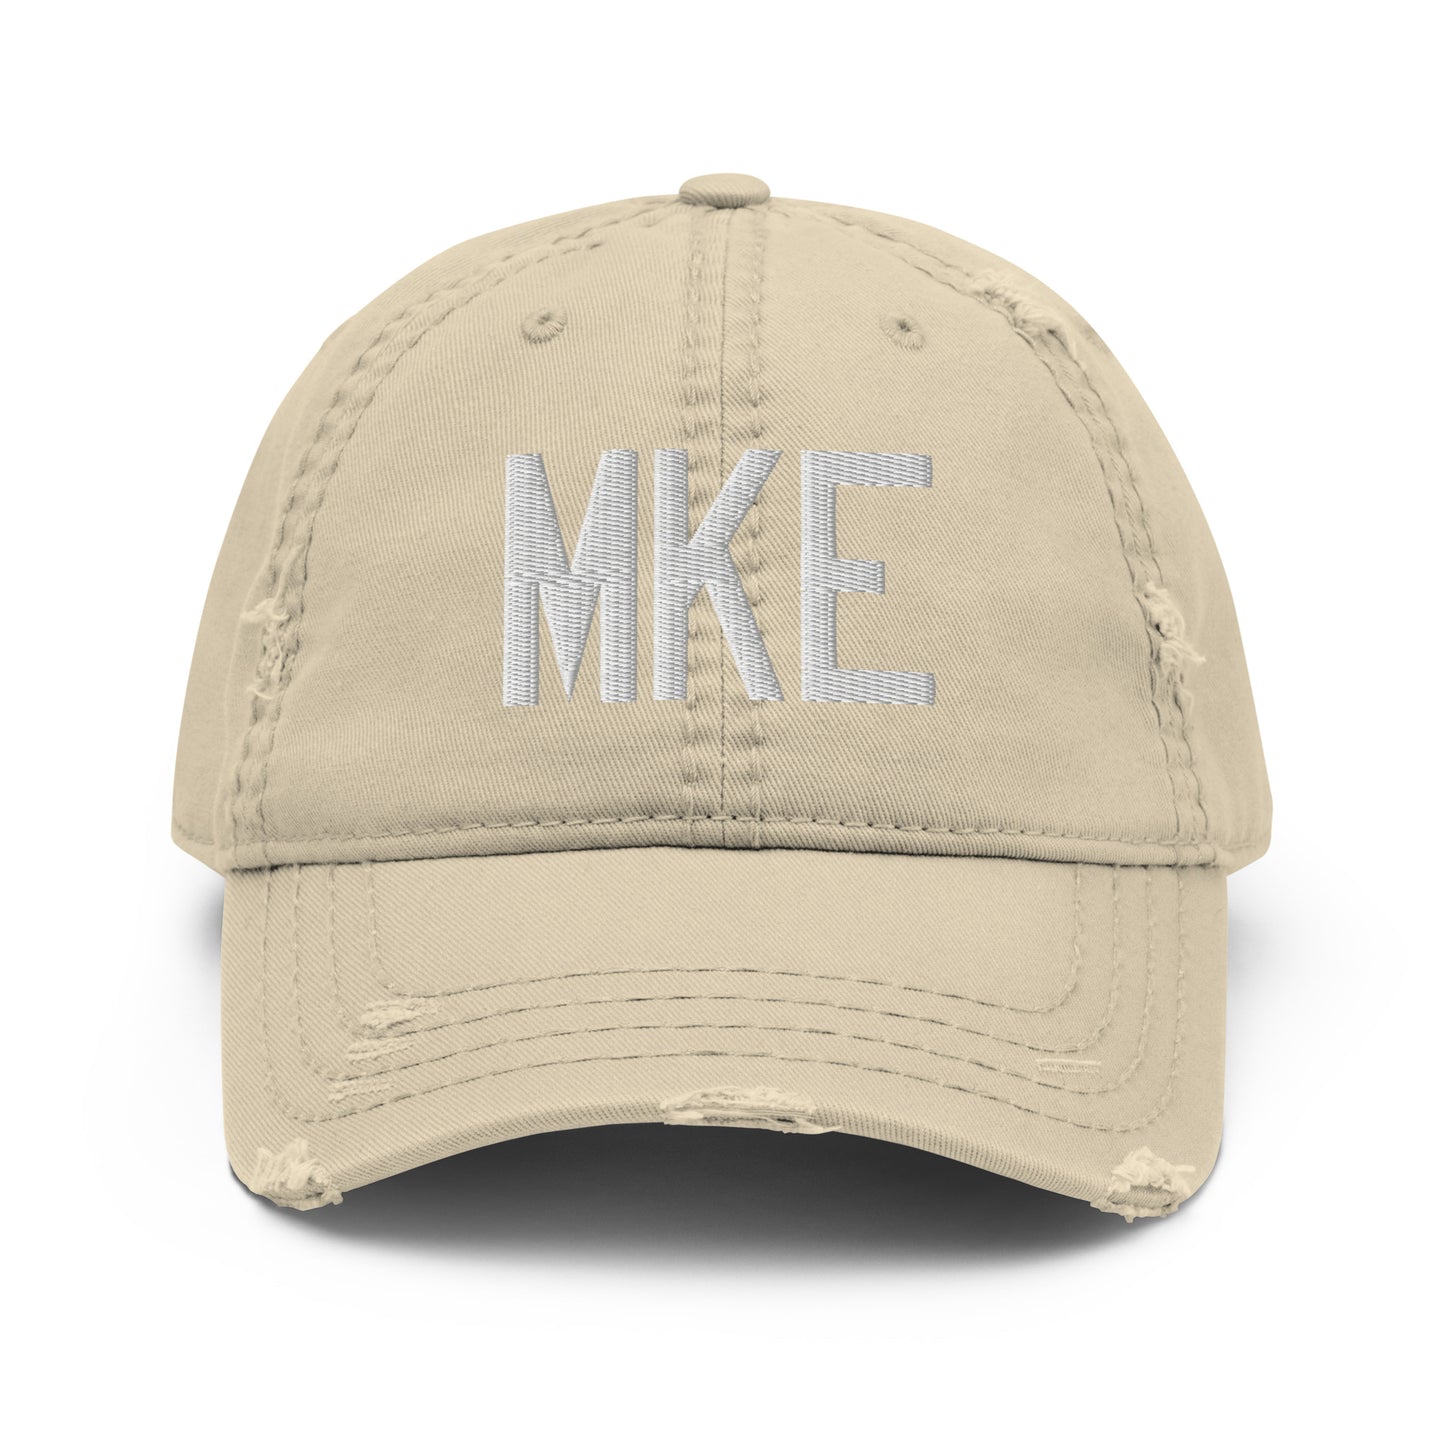 Airport Code Distressed Hat - White • MKE Milwaukee • YHM Designs - Image 18